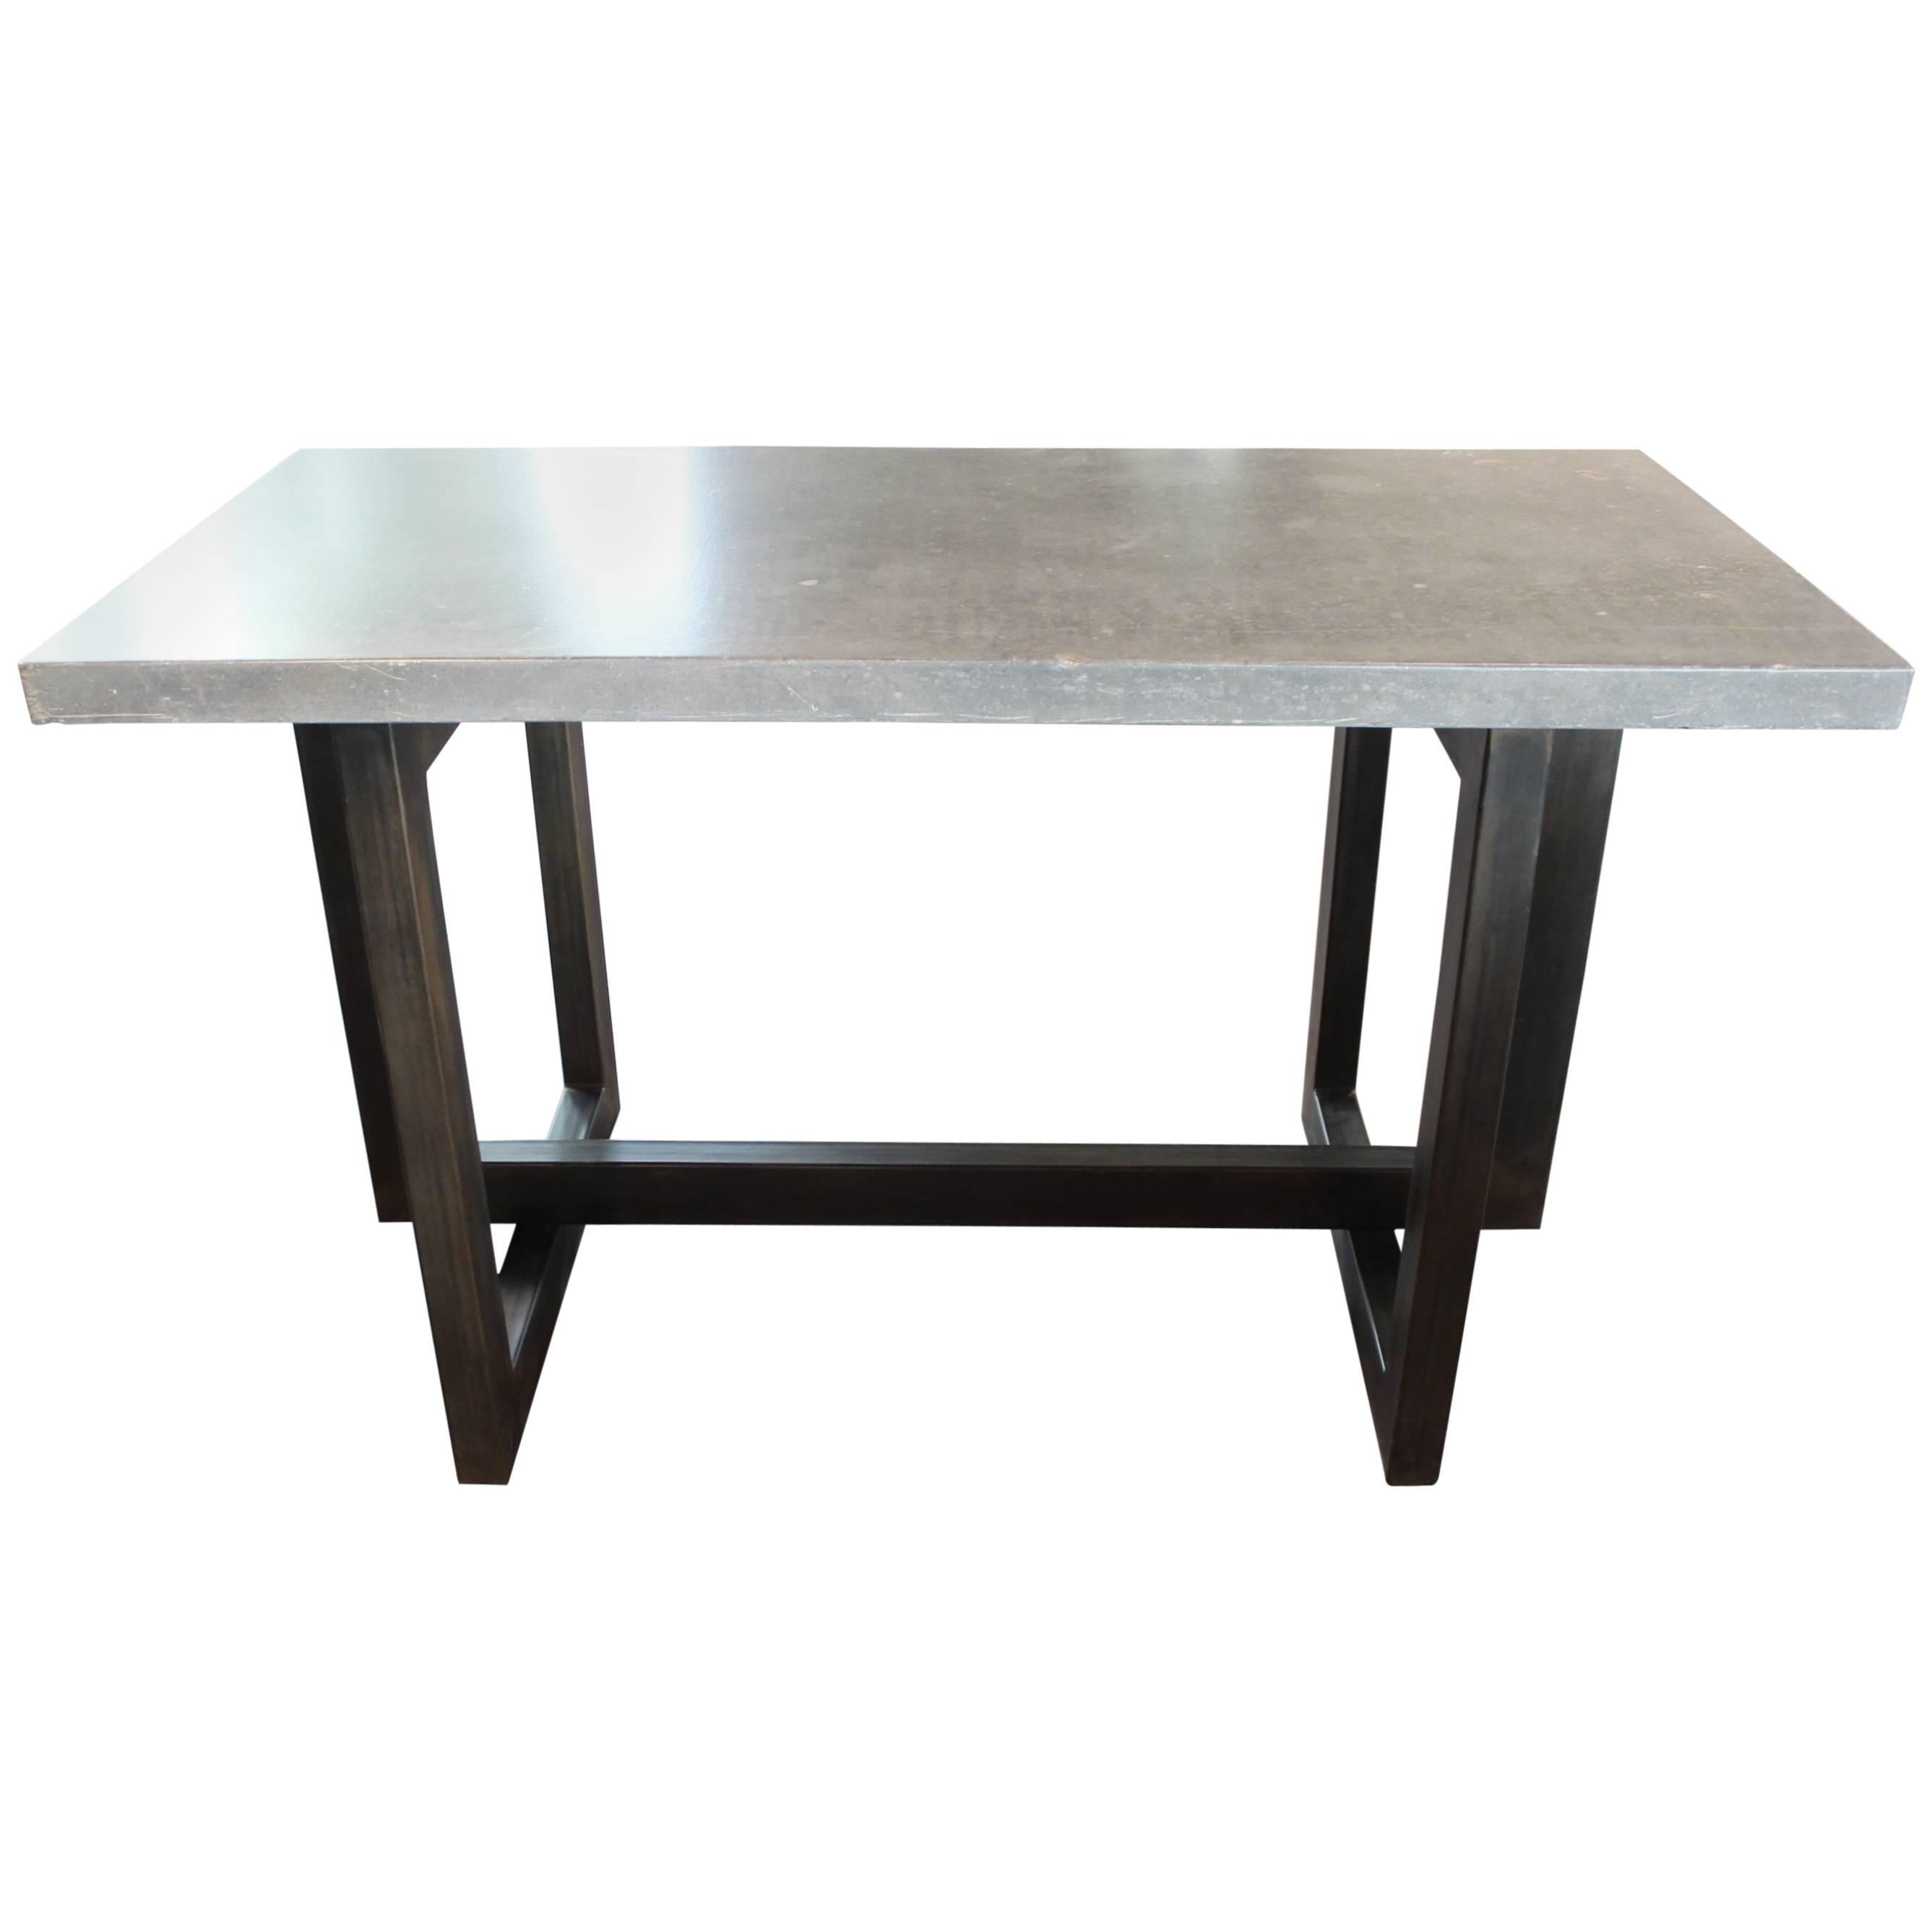 Geometric Form Patinated Steel Base with Archival Blue Stone Top